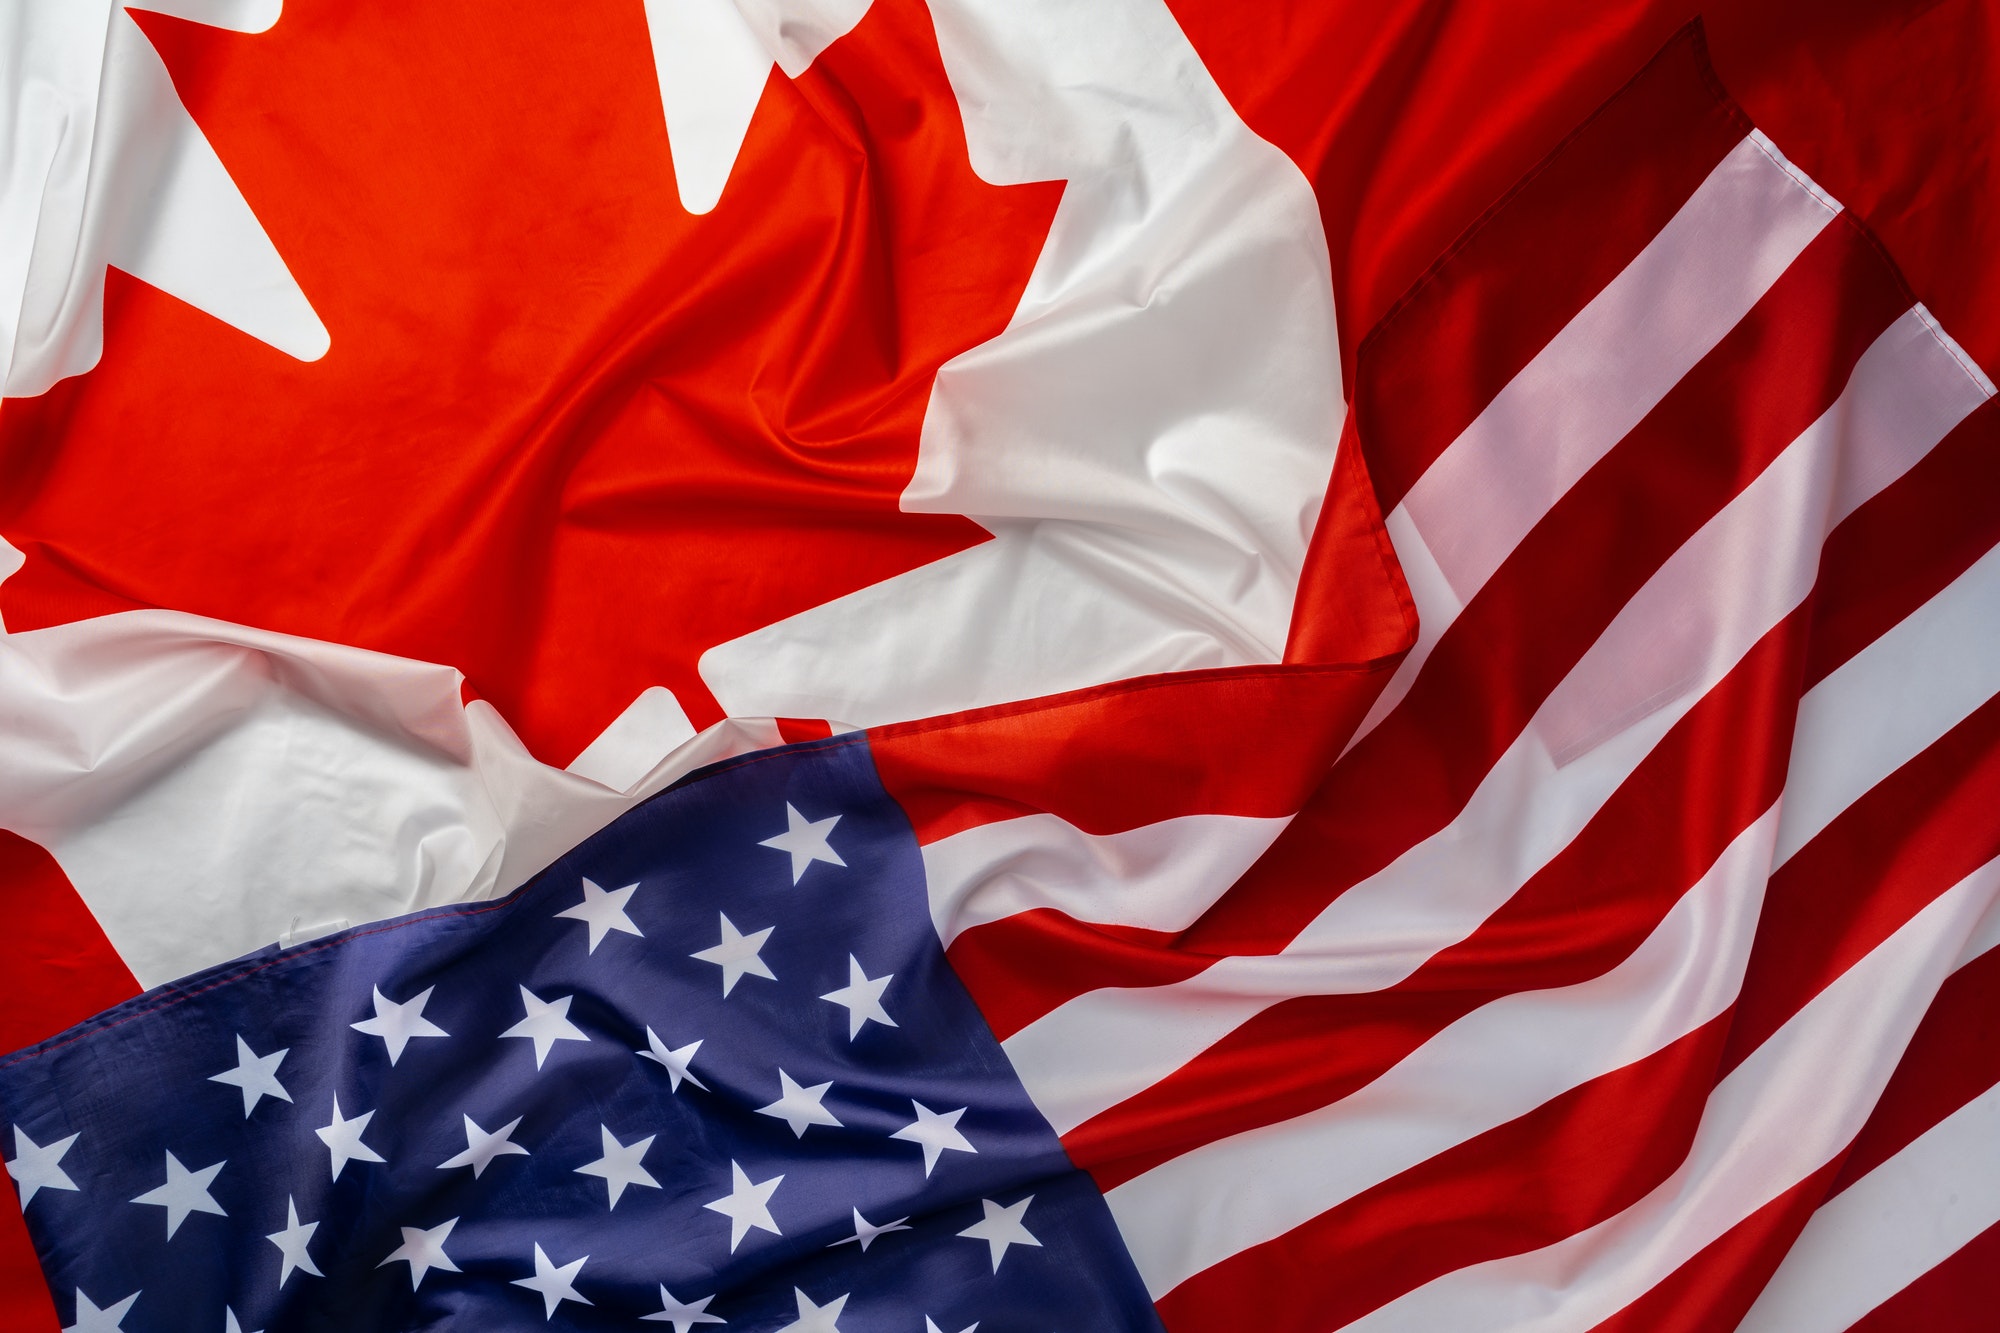 Flags of Canada and USA folded together